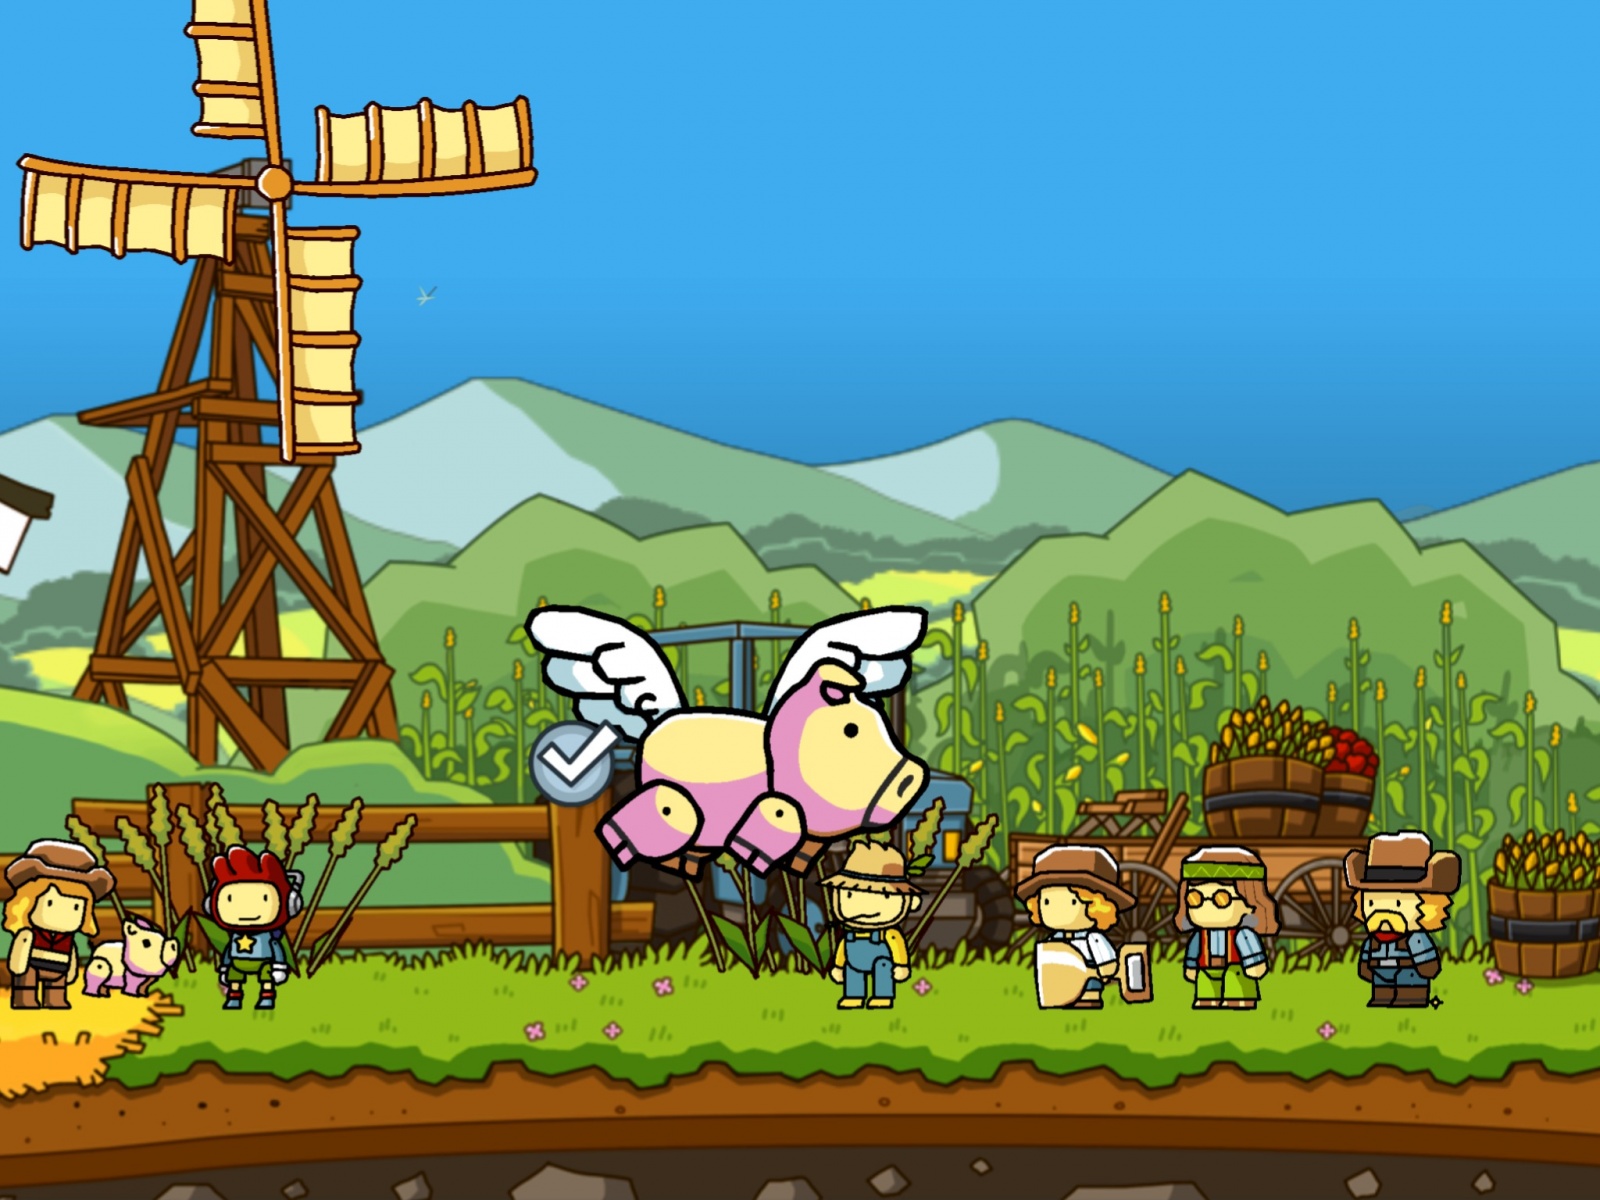 use-your-words-to-save-your-sister-in-scribblenauts-unlimited-image-cultofandroidcomwp-contentuploads201512when-pigs-fly-jpg